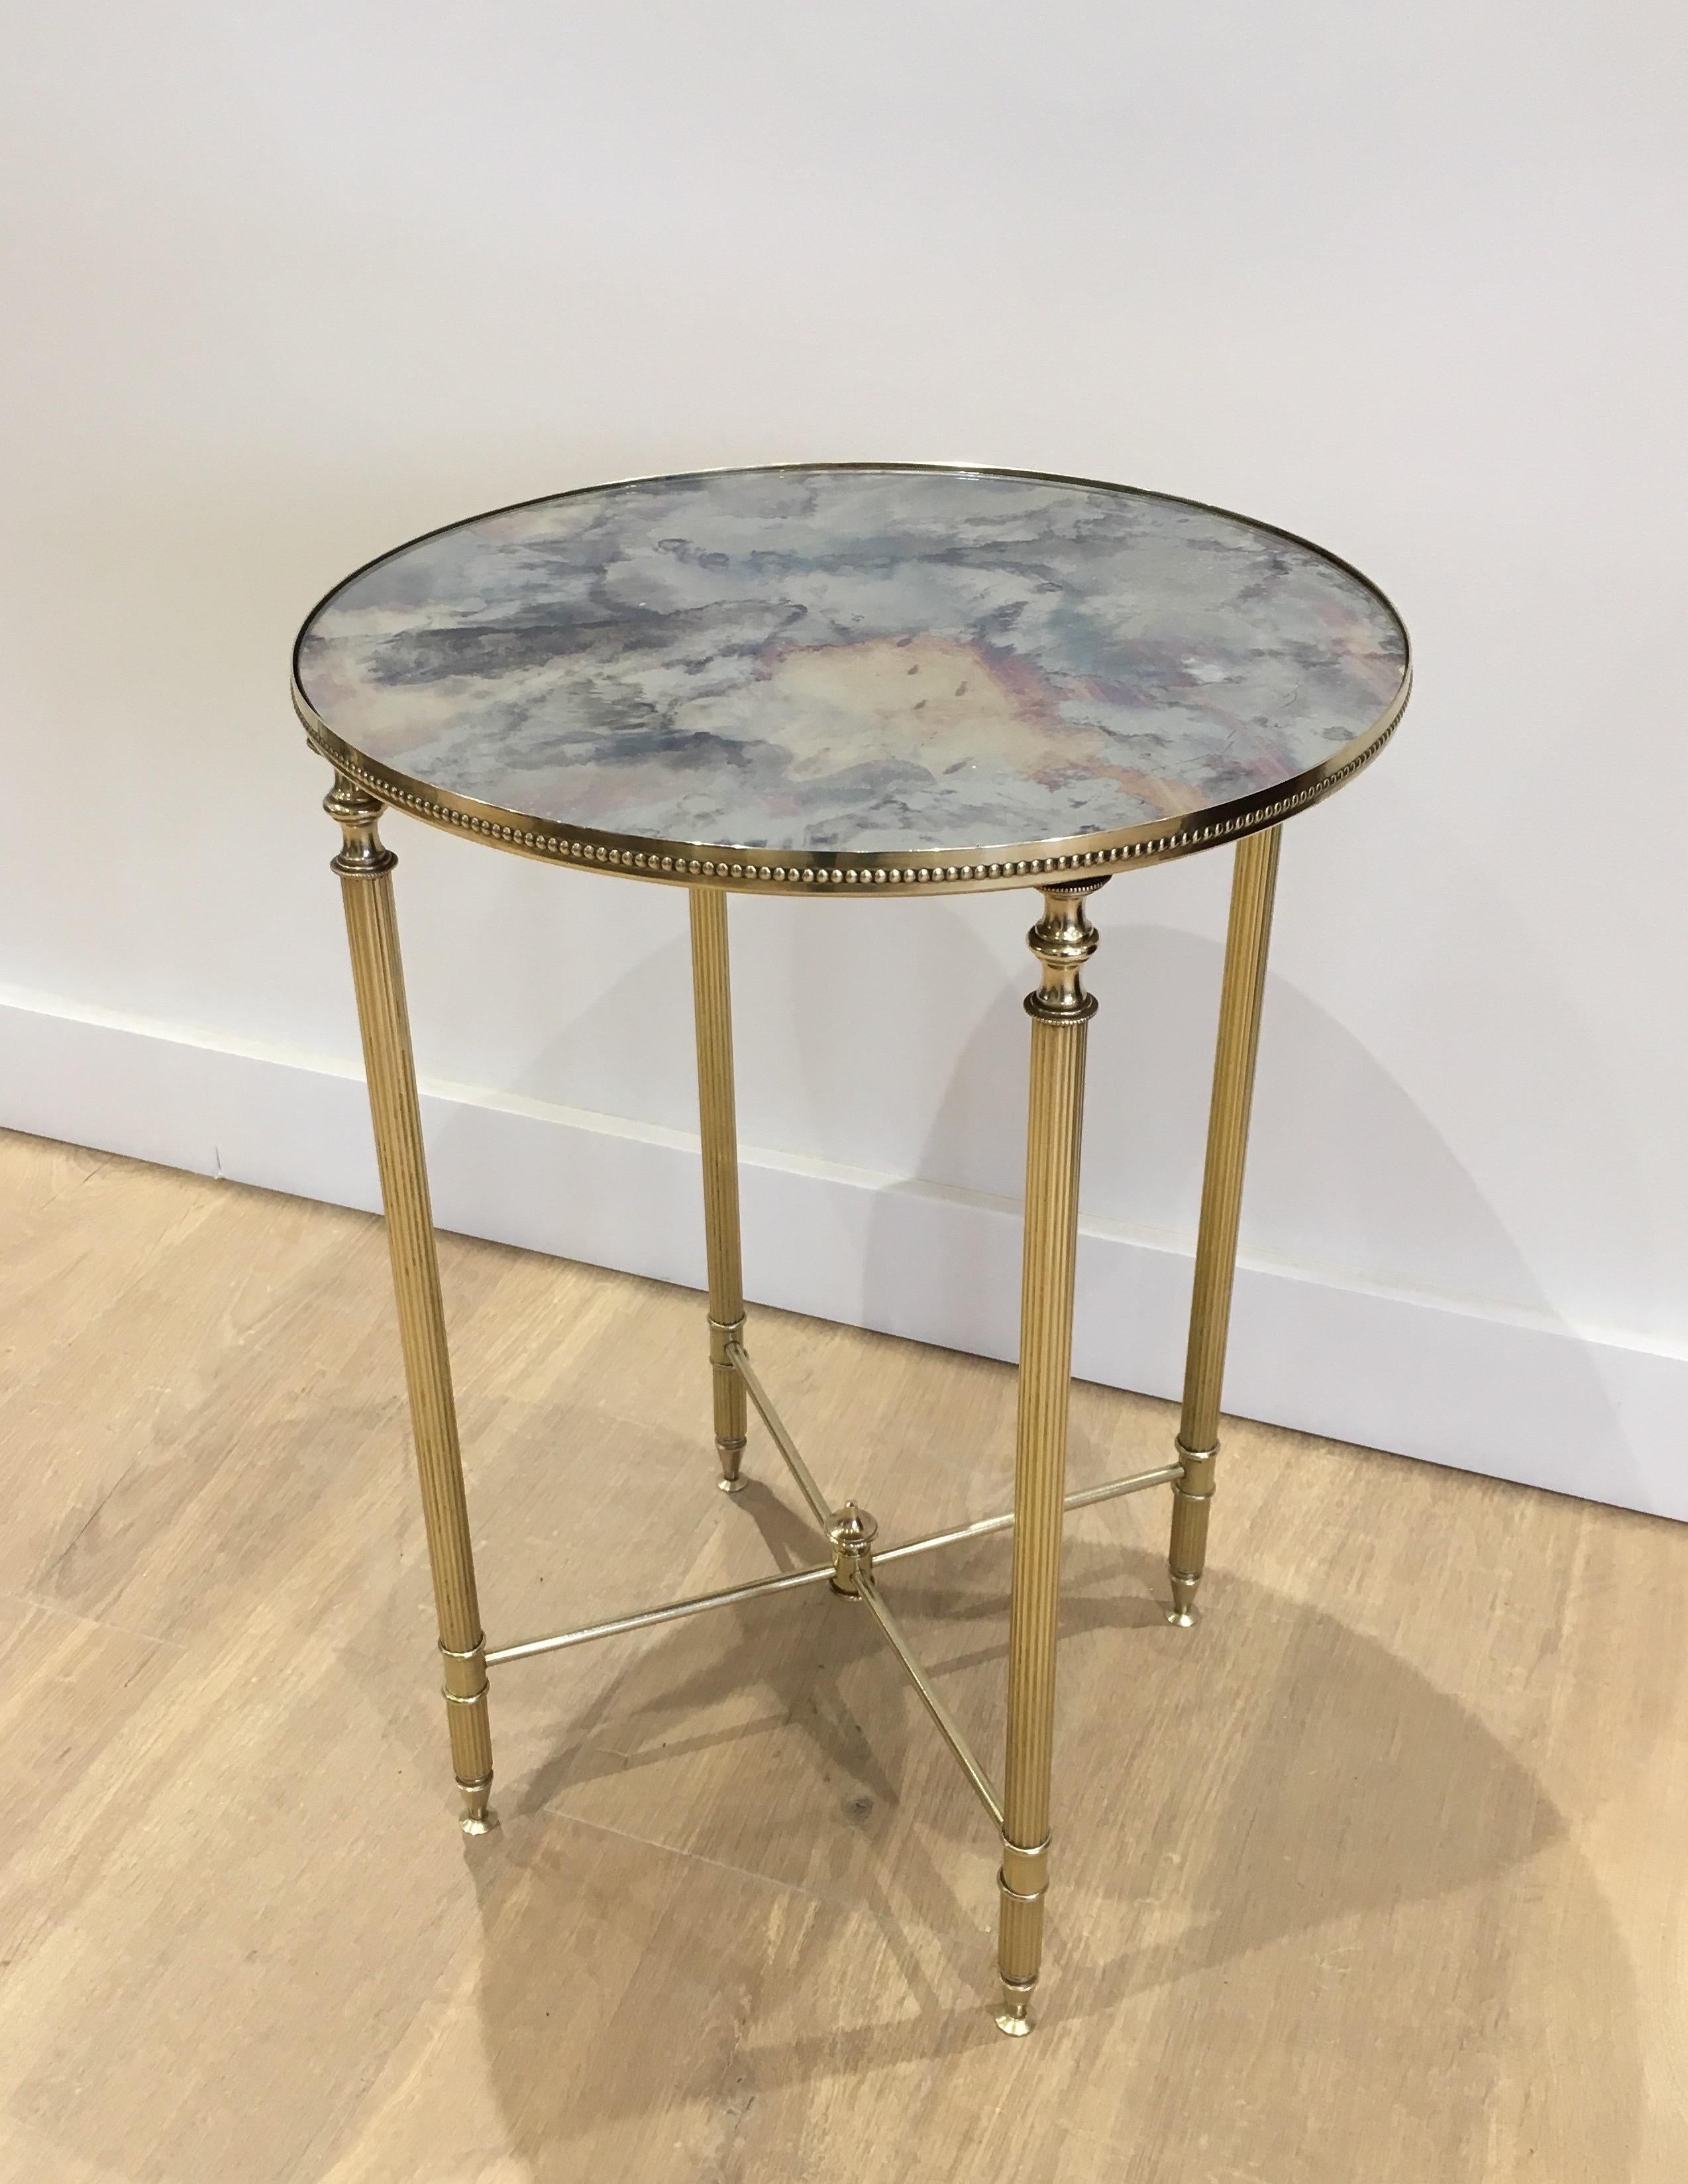 This neoclassical style round side table is made of brass with faux-antiques mirror top. This is a very nice work in the style of famous French designer Maison Jansen, circa 1940.